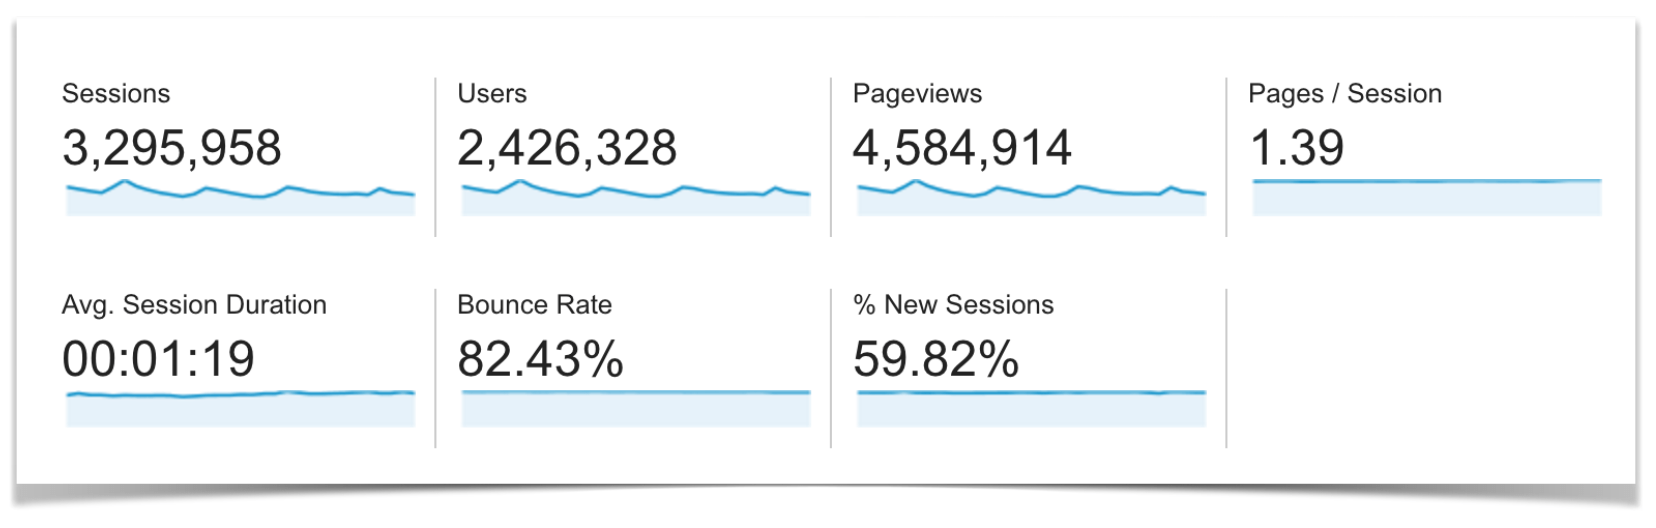 Google Analytics Traffic Overview for March.